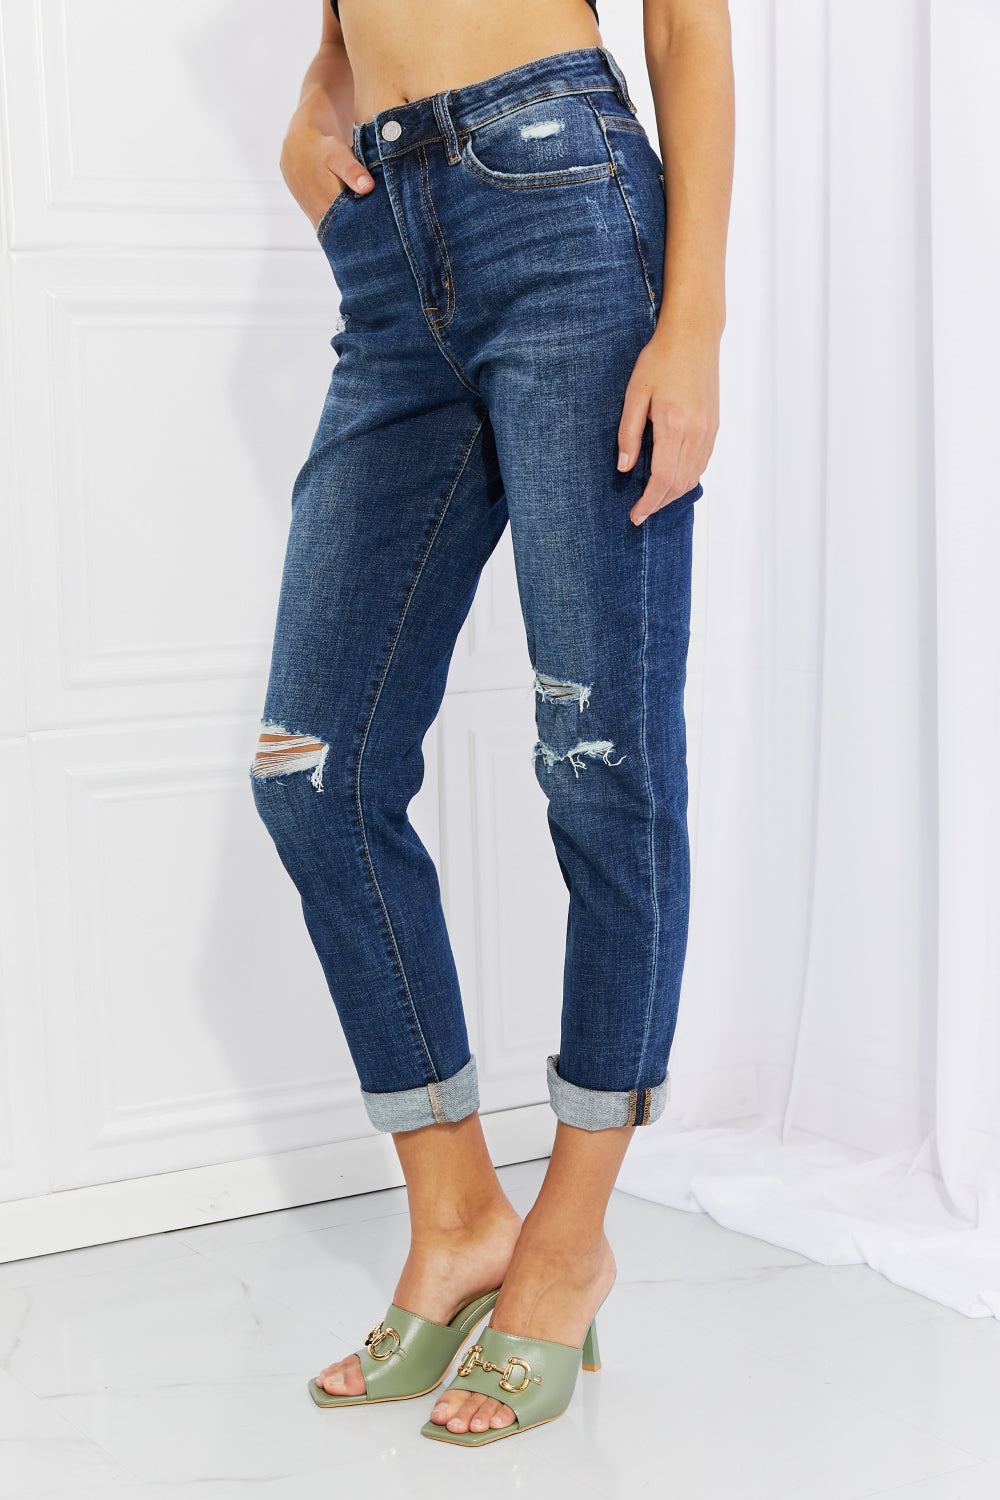 Cheri - Vervet by Flying Monkey Full Size Distressed Cropped Jeans with Pockets